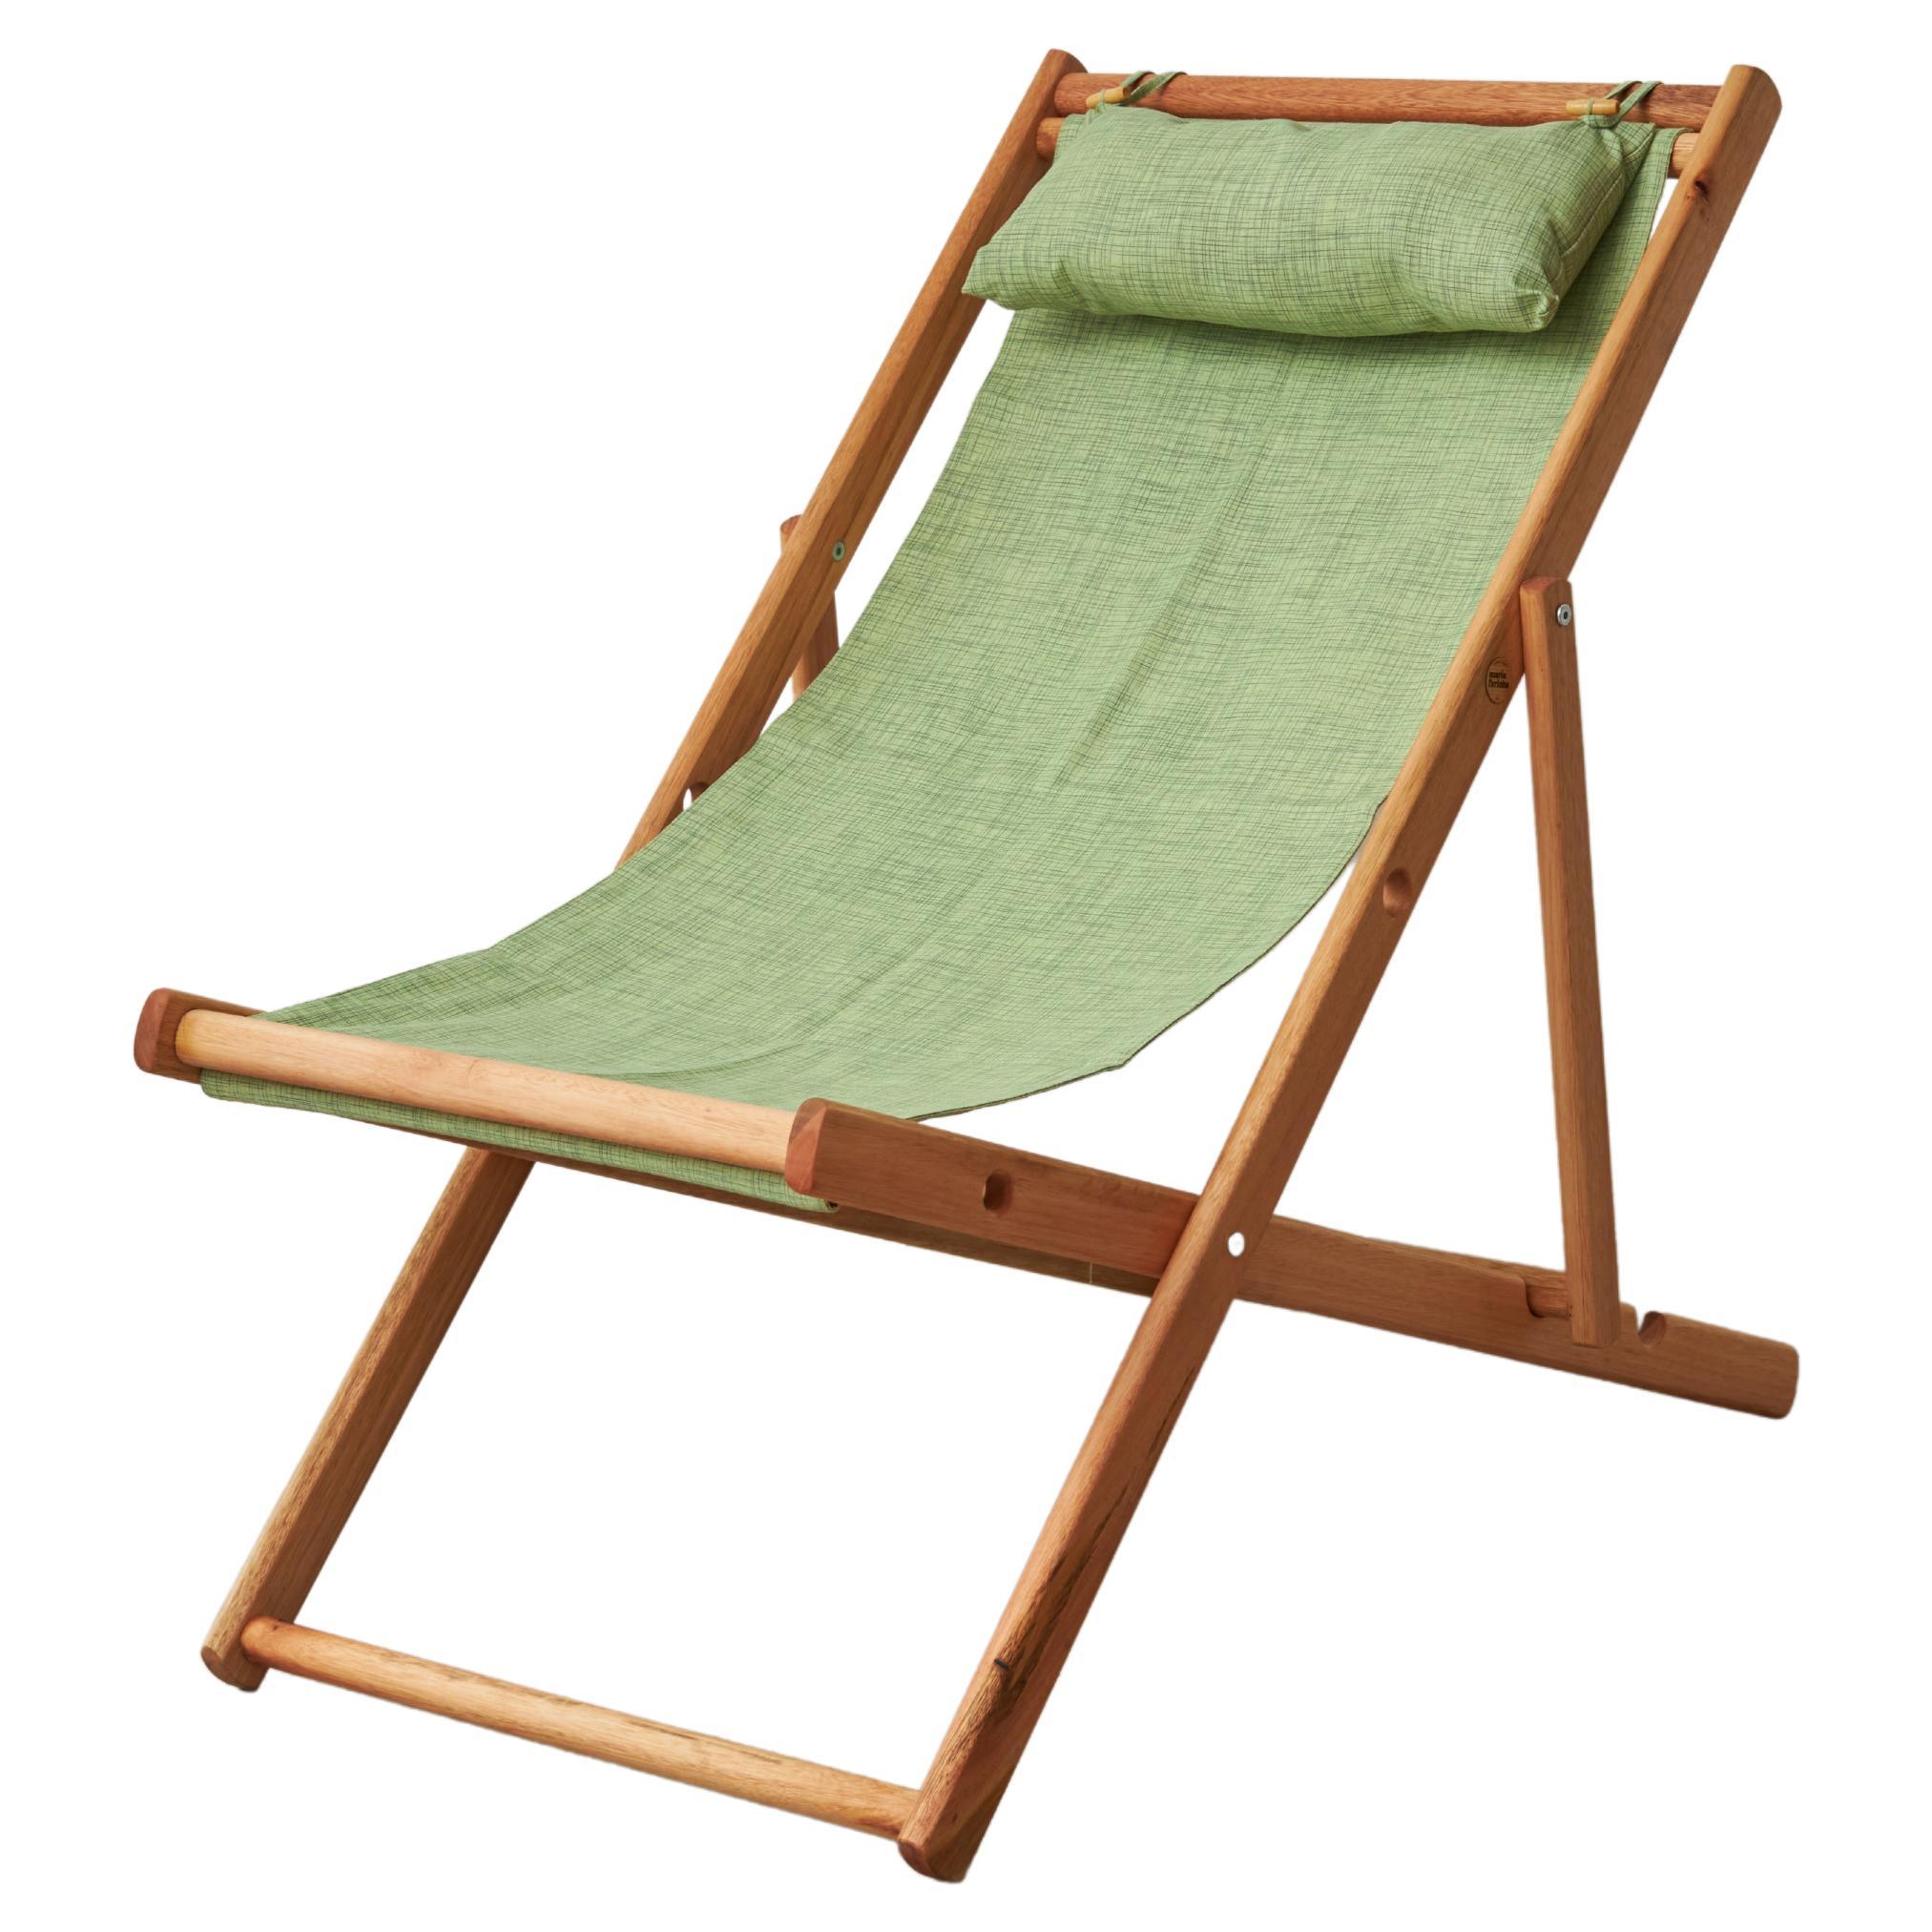  Green 'Maria Farinha' Armchair - Brazilian design by André Bianco For Sale